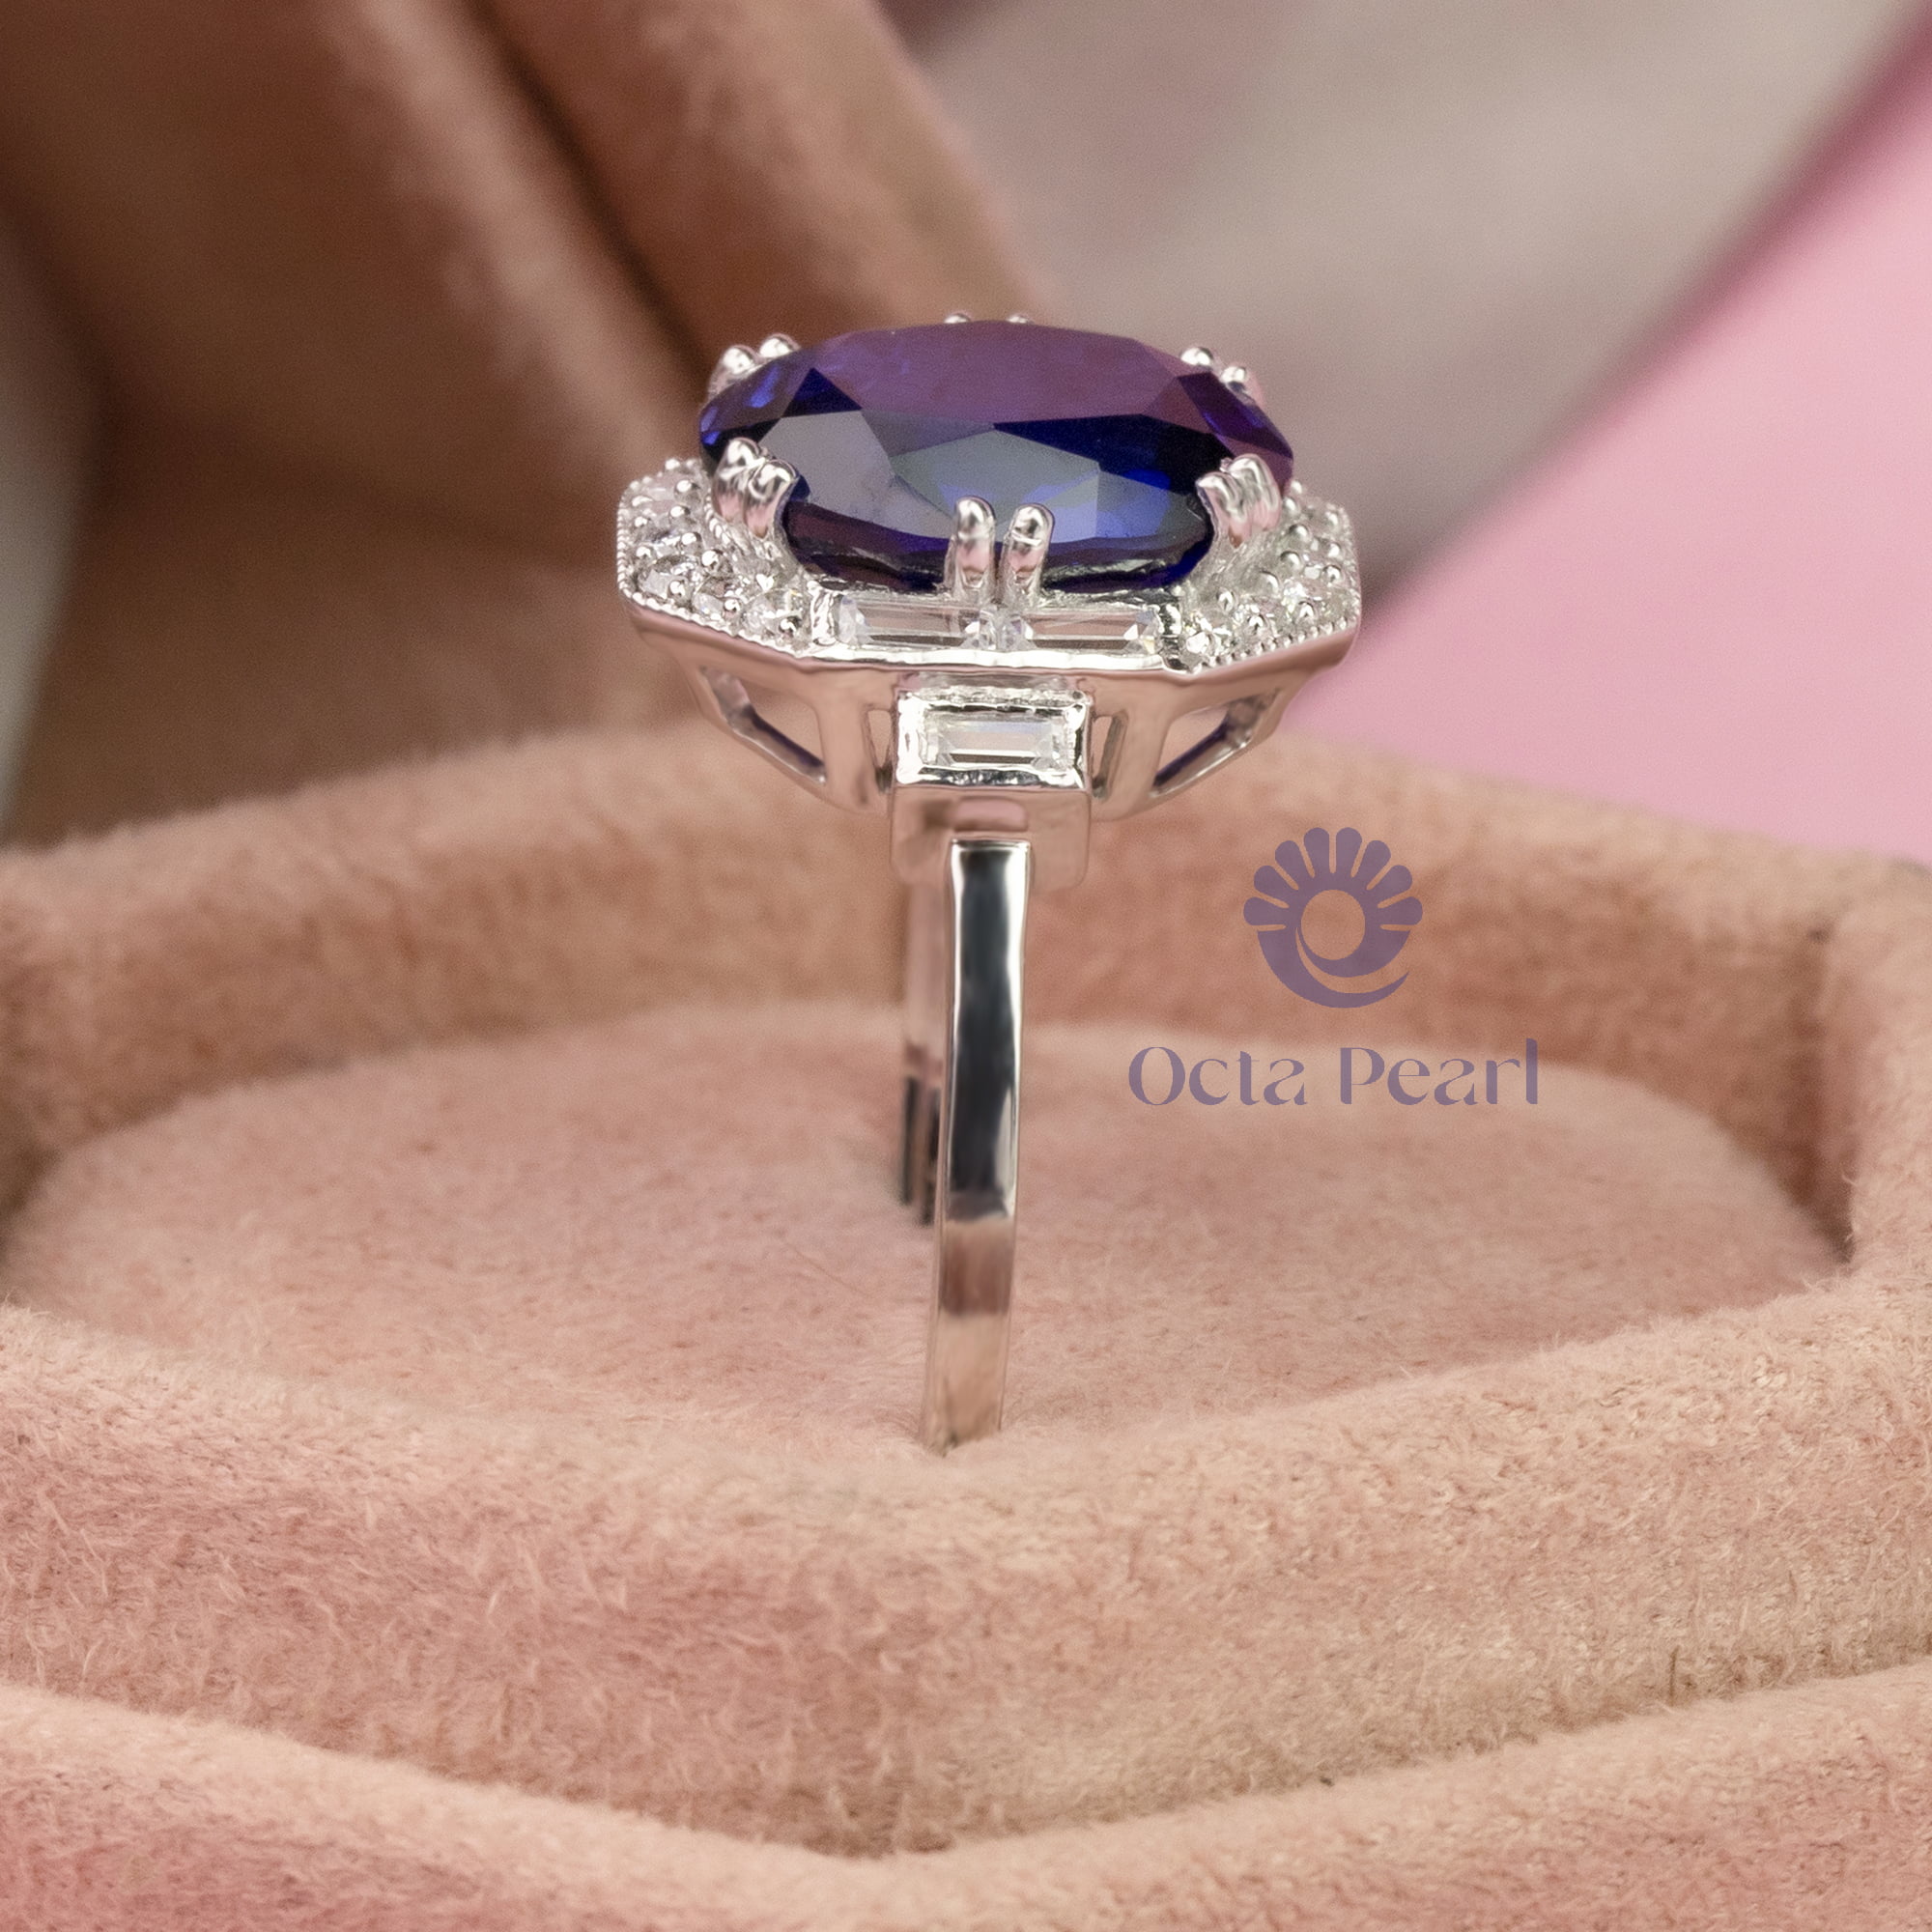 Gorgeous Sapphire Blue Oval With Baguette And Round Cut CZ Stone Art Deco Ring (5 2/3 TCW)